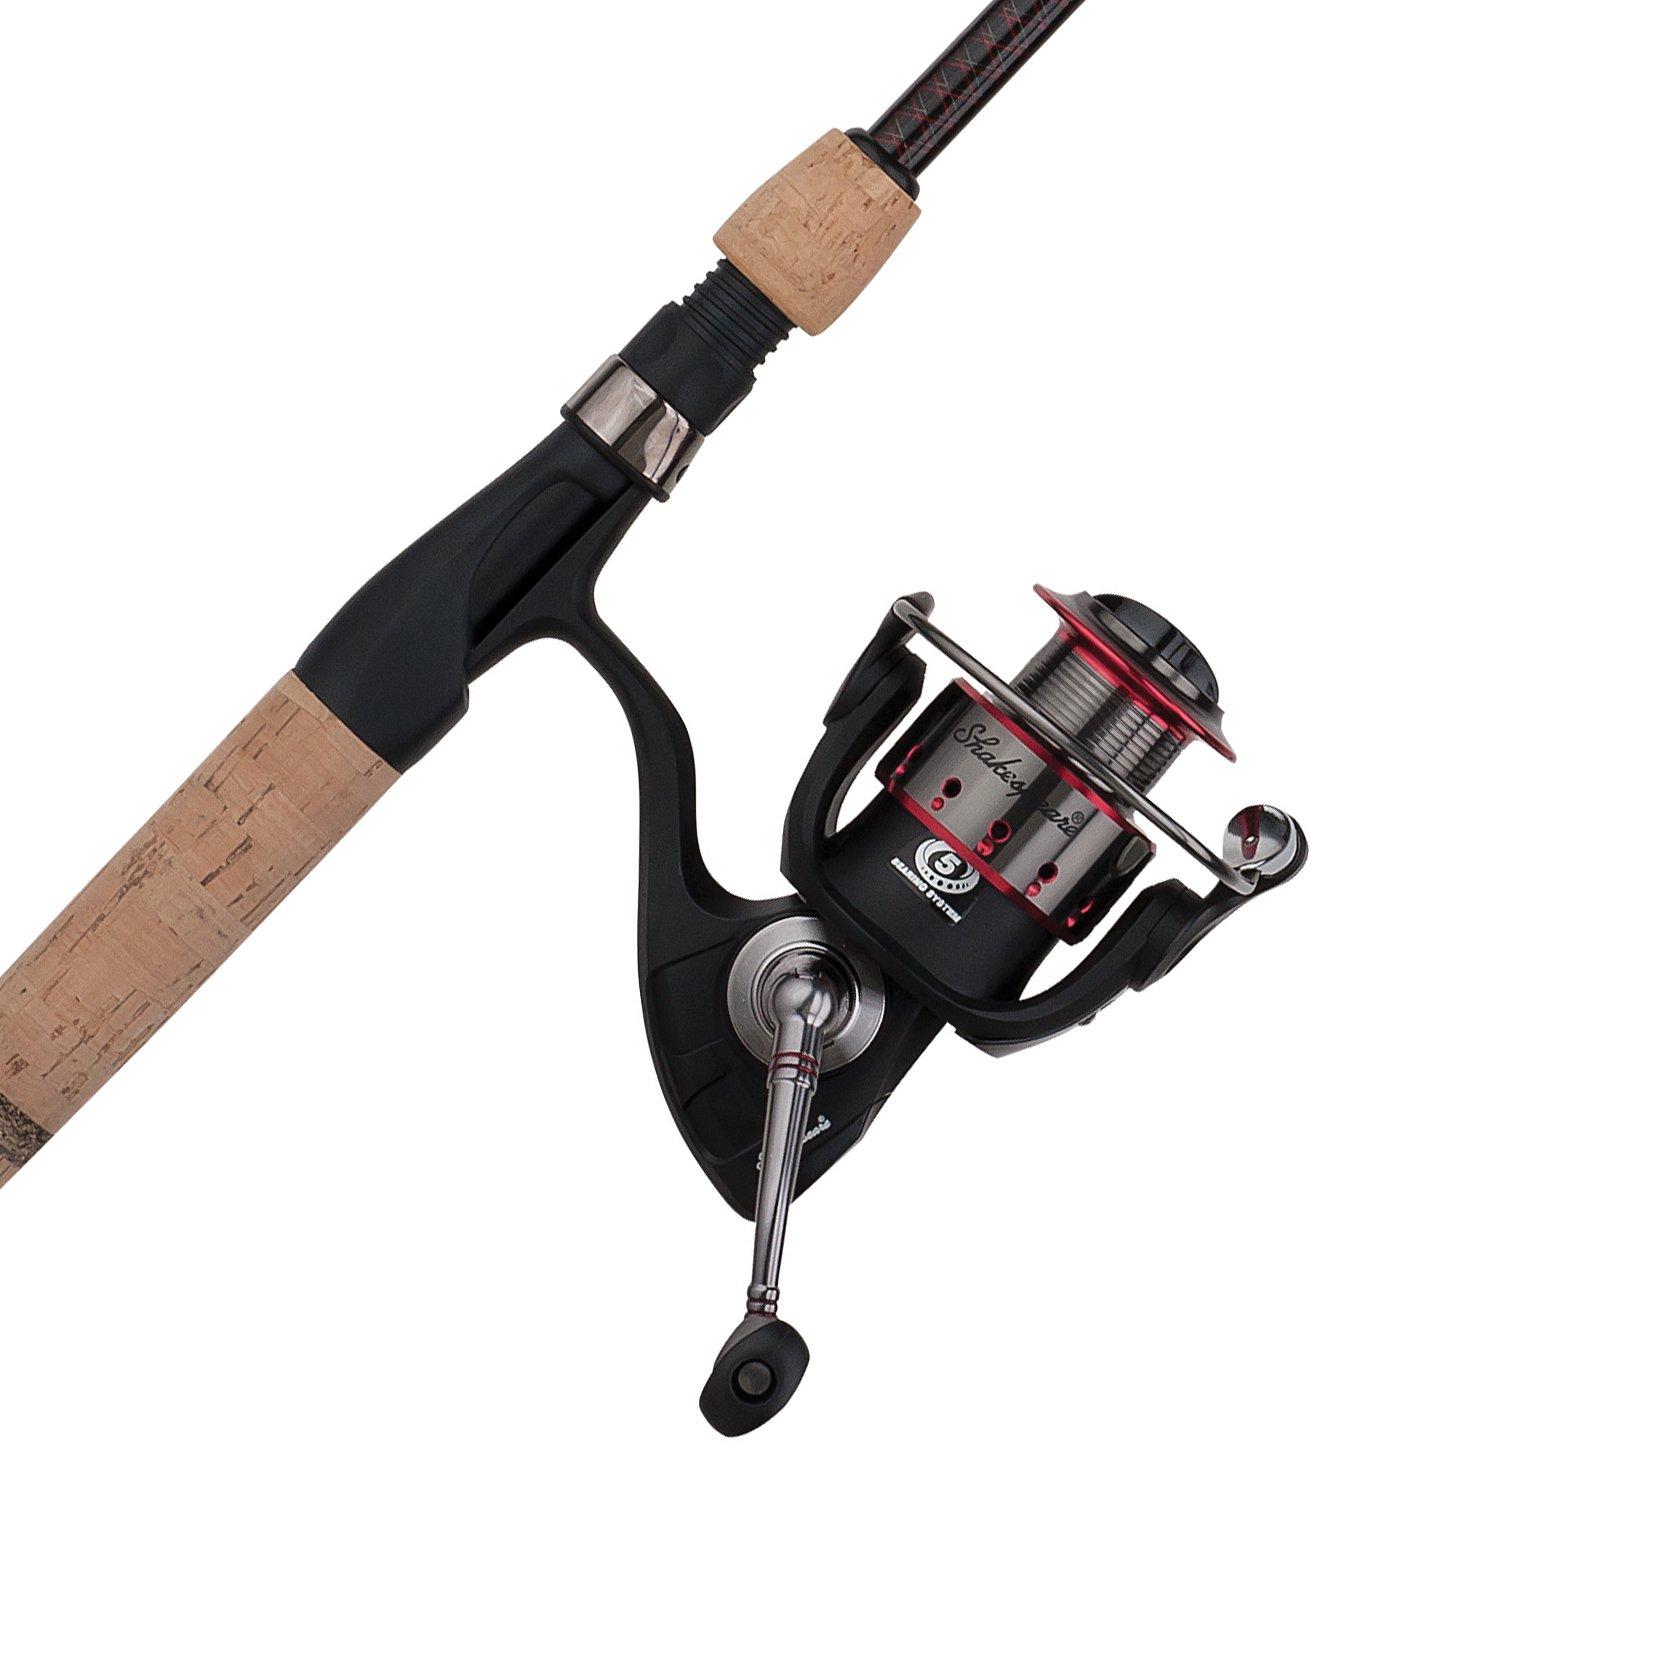 Shakespeare Ugly Stik Gx2 Spincast Rod And Reel Fishing Combo